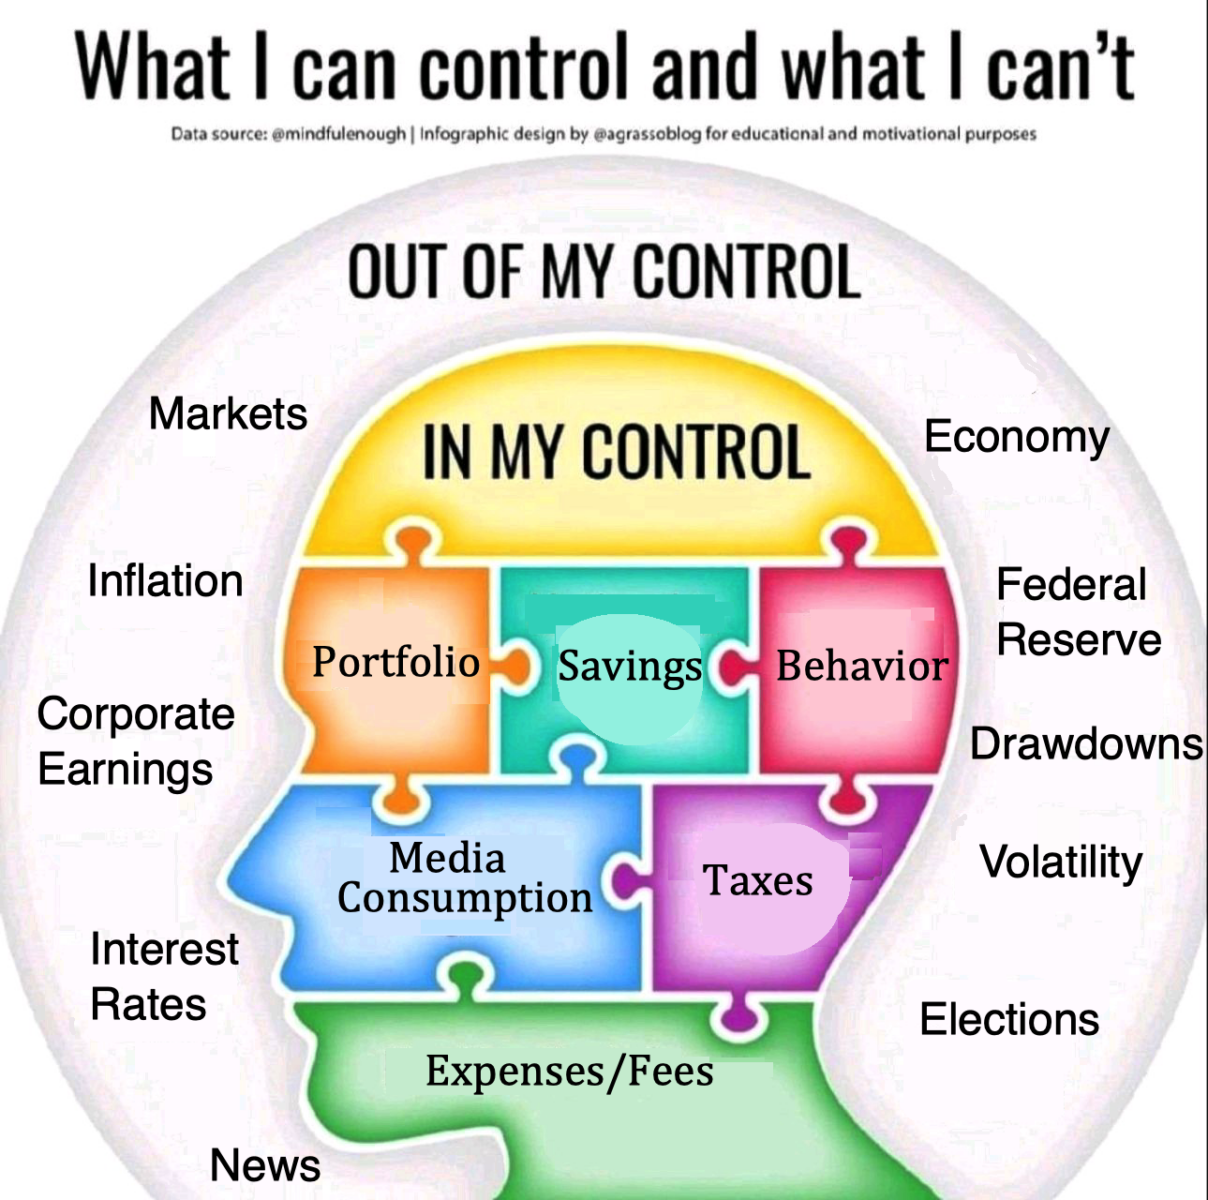 Out of my control